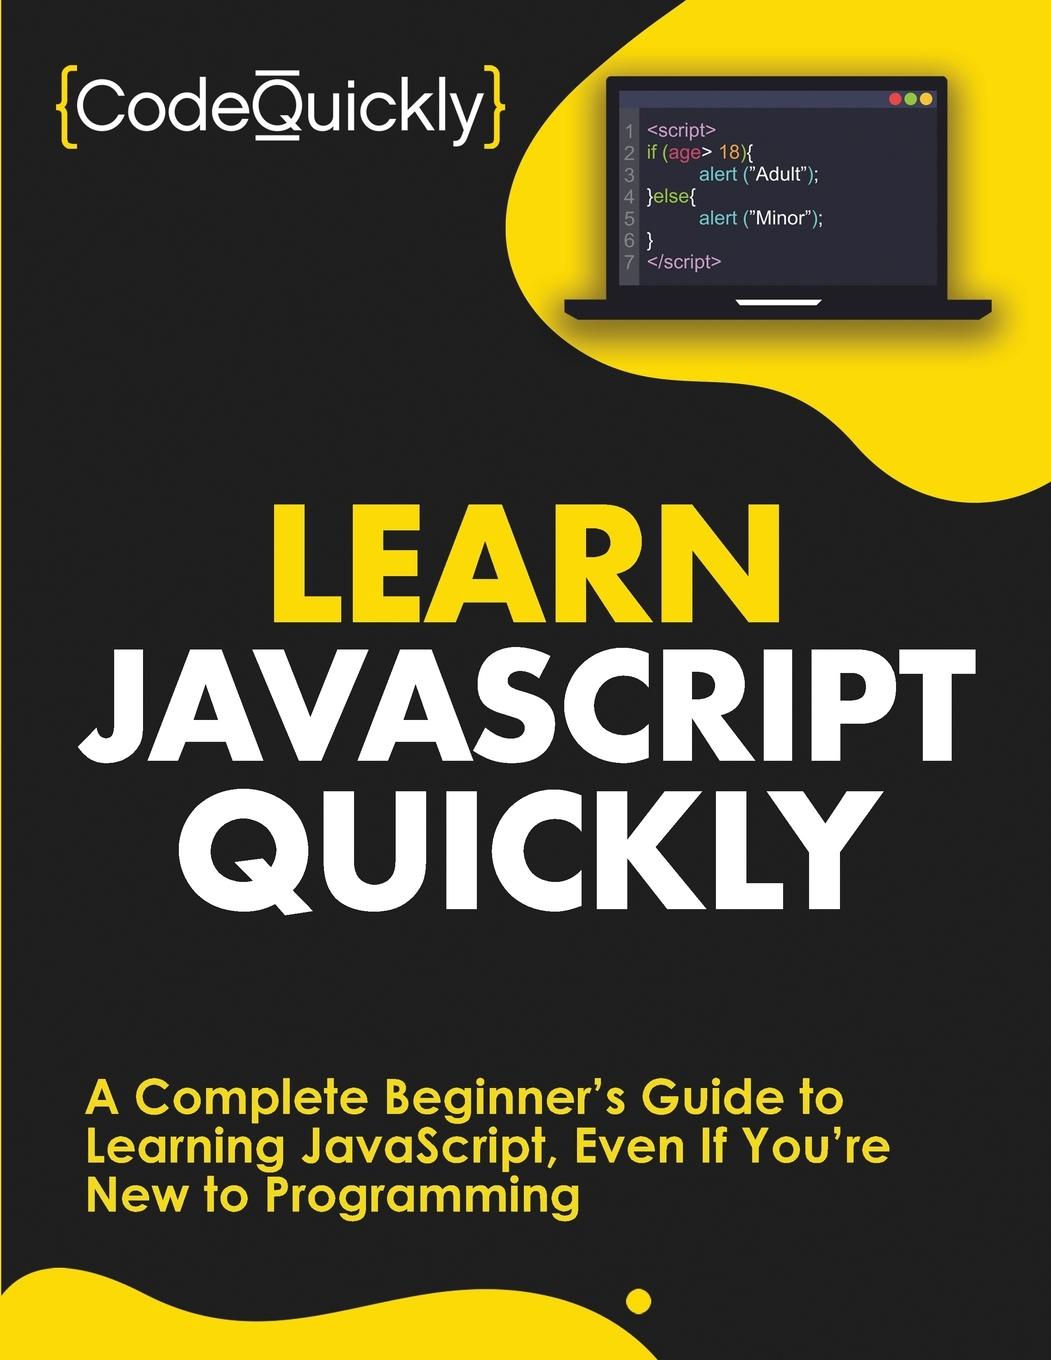 Book Learn JavaScript Quickly 